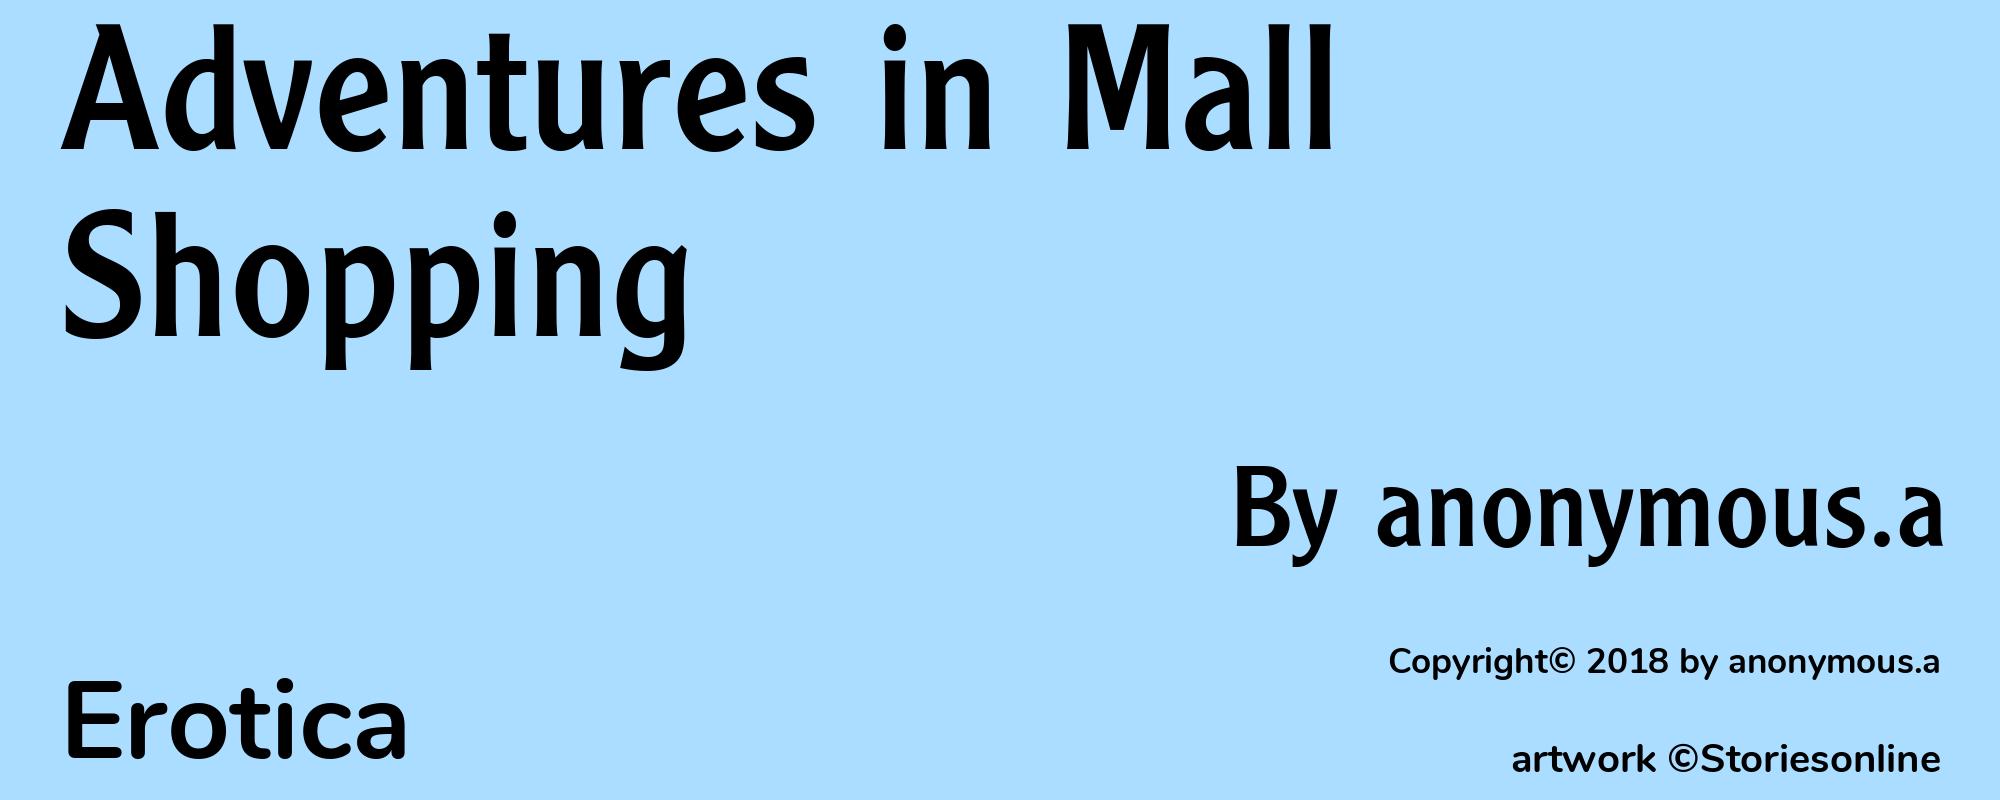 Adventures in Mall Shopping - Cover